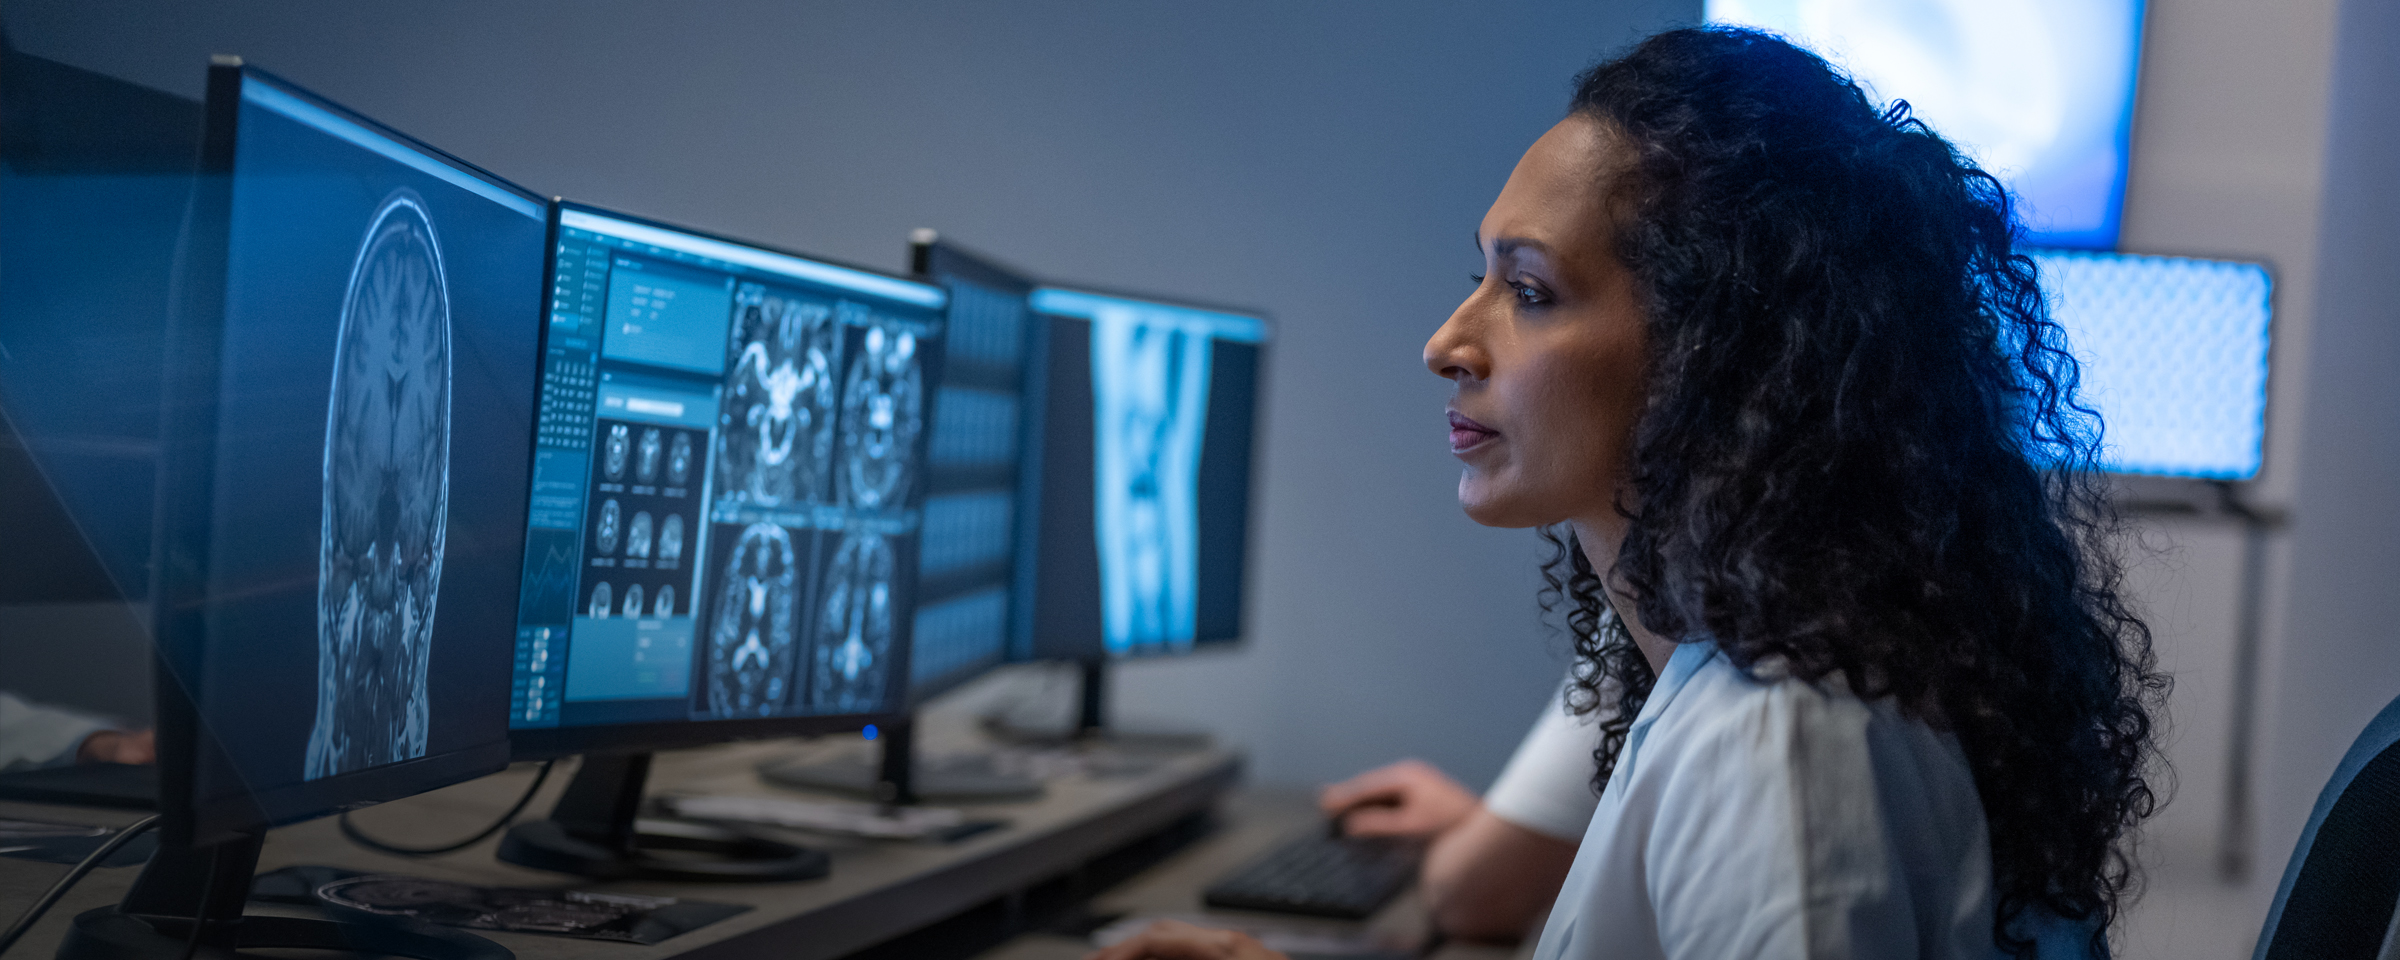 Woman sitting in front of three monitors in a dark room looking at MRI scans